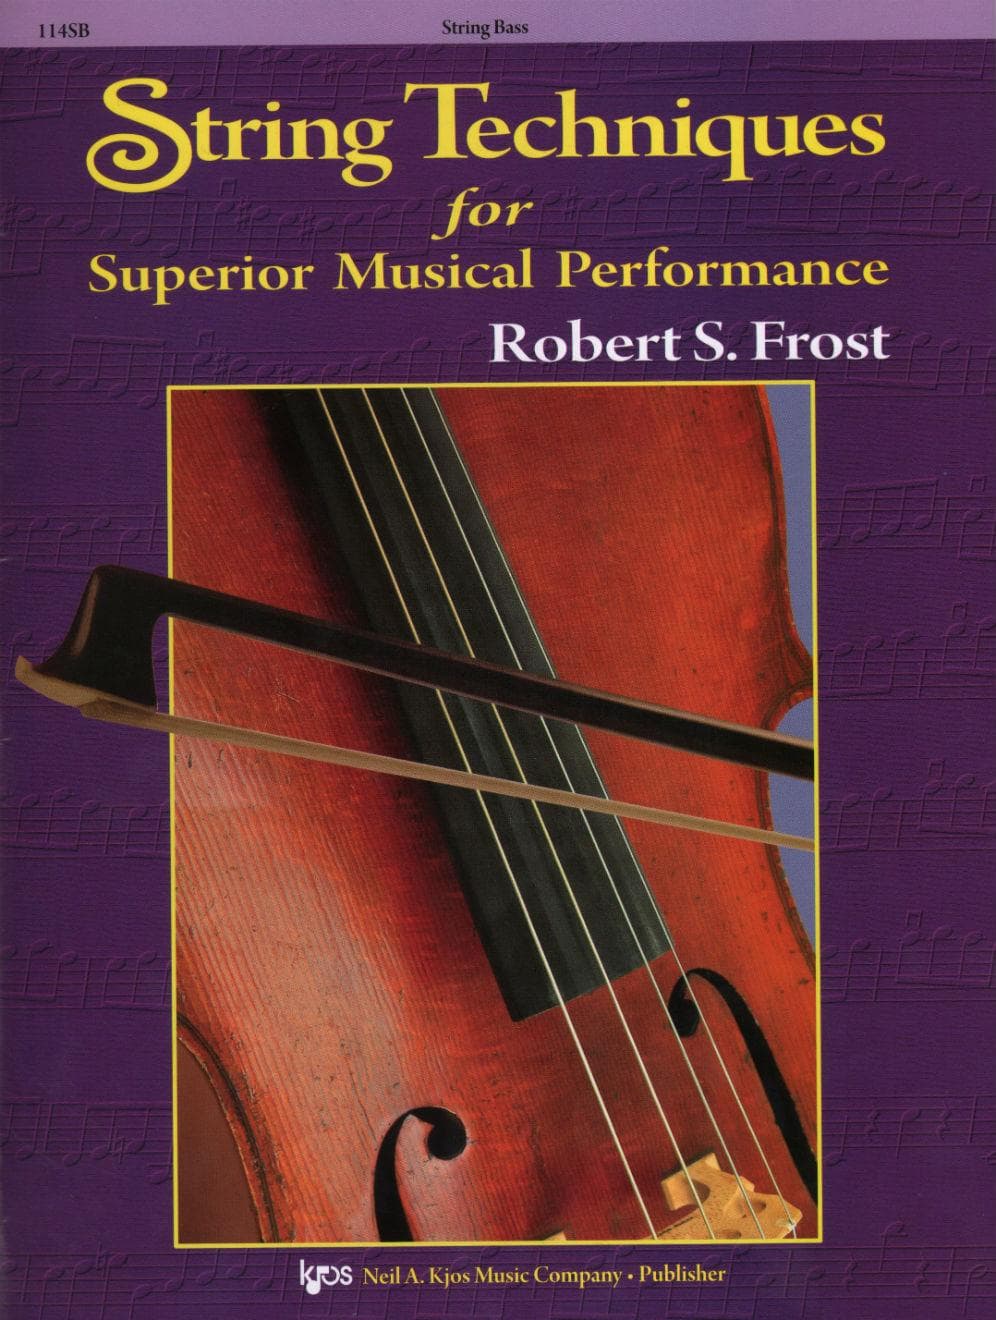 Frost, Robert - String Techniques for Superior Musical Performance - Bass - Kjos Music Co